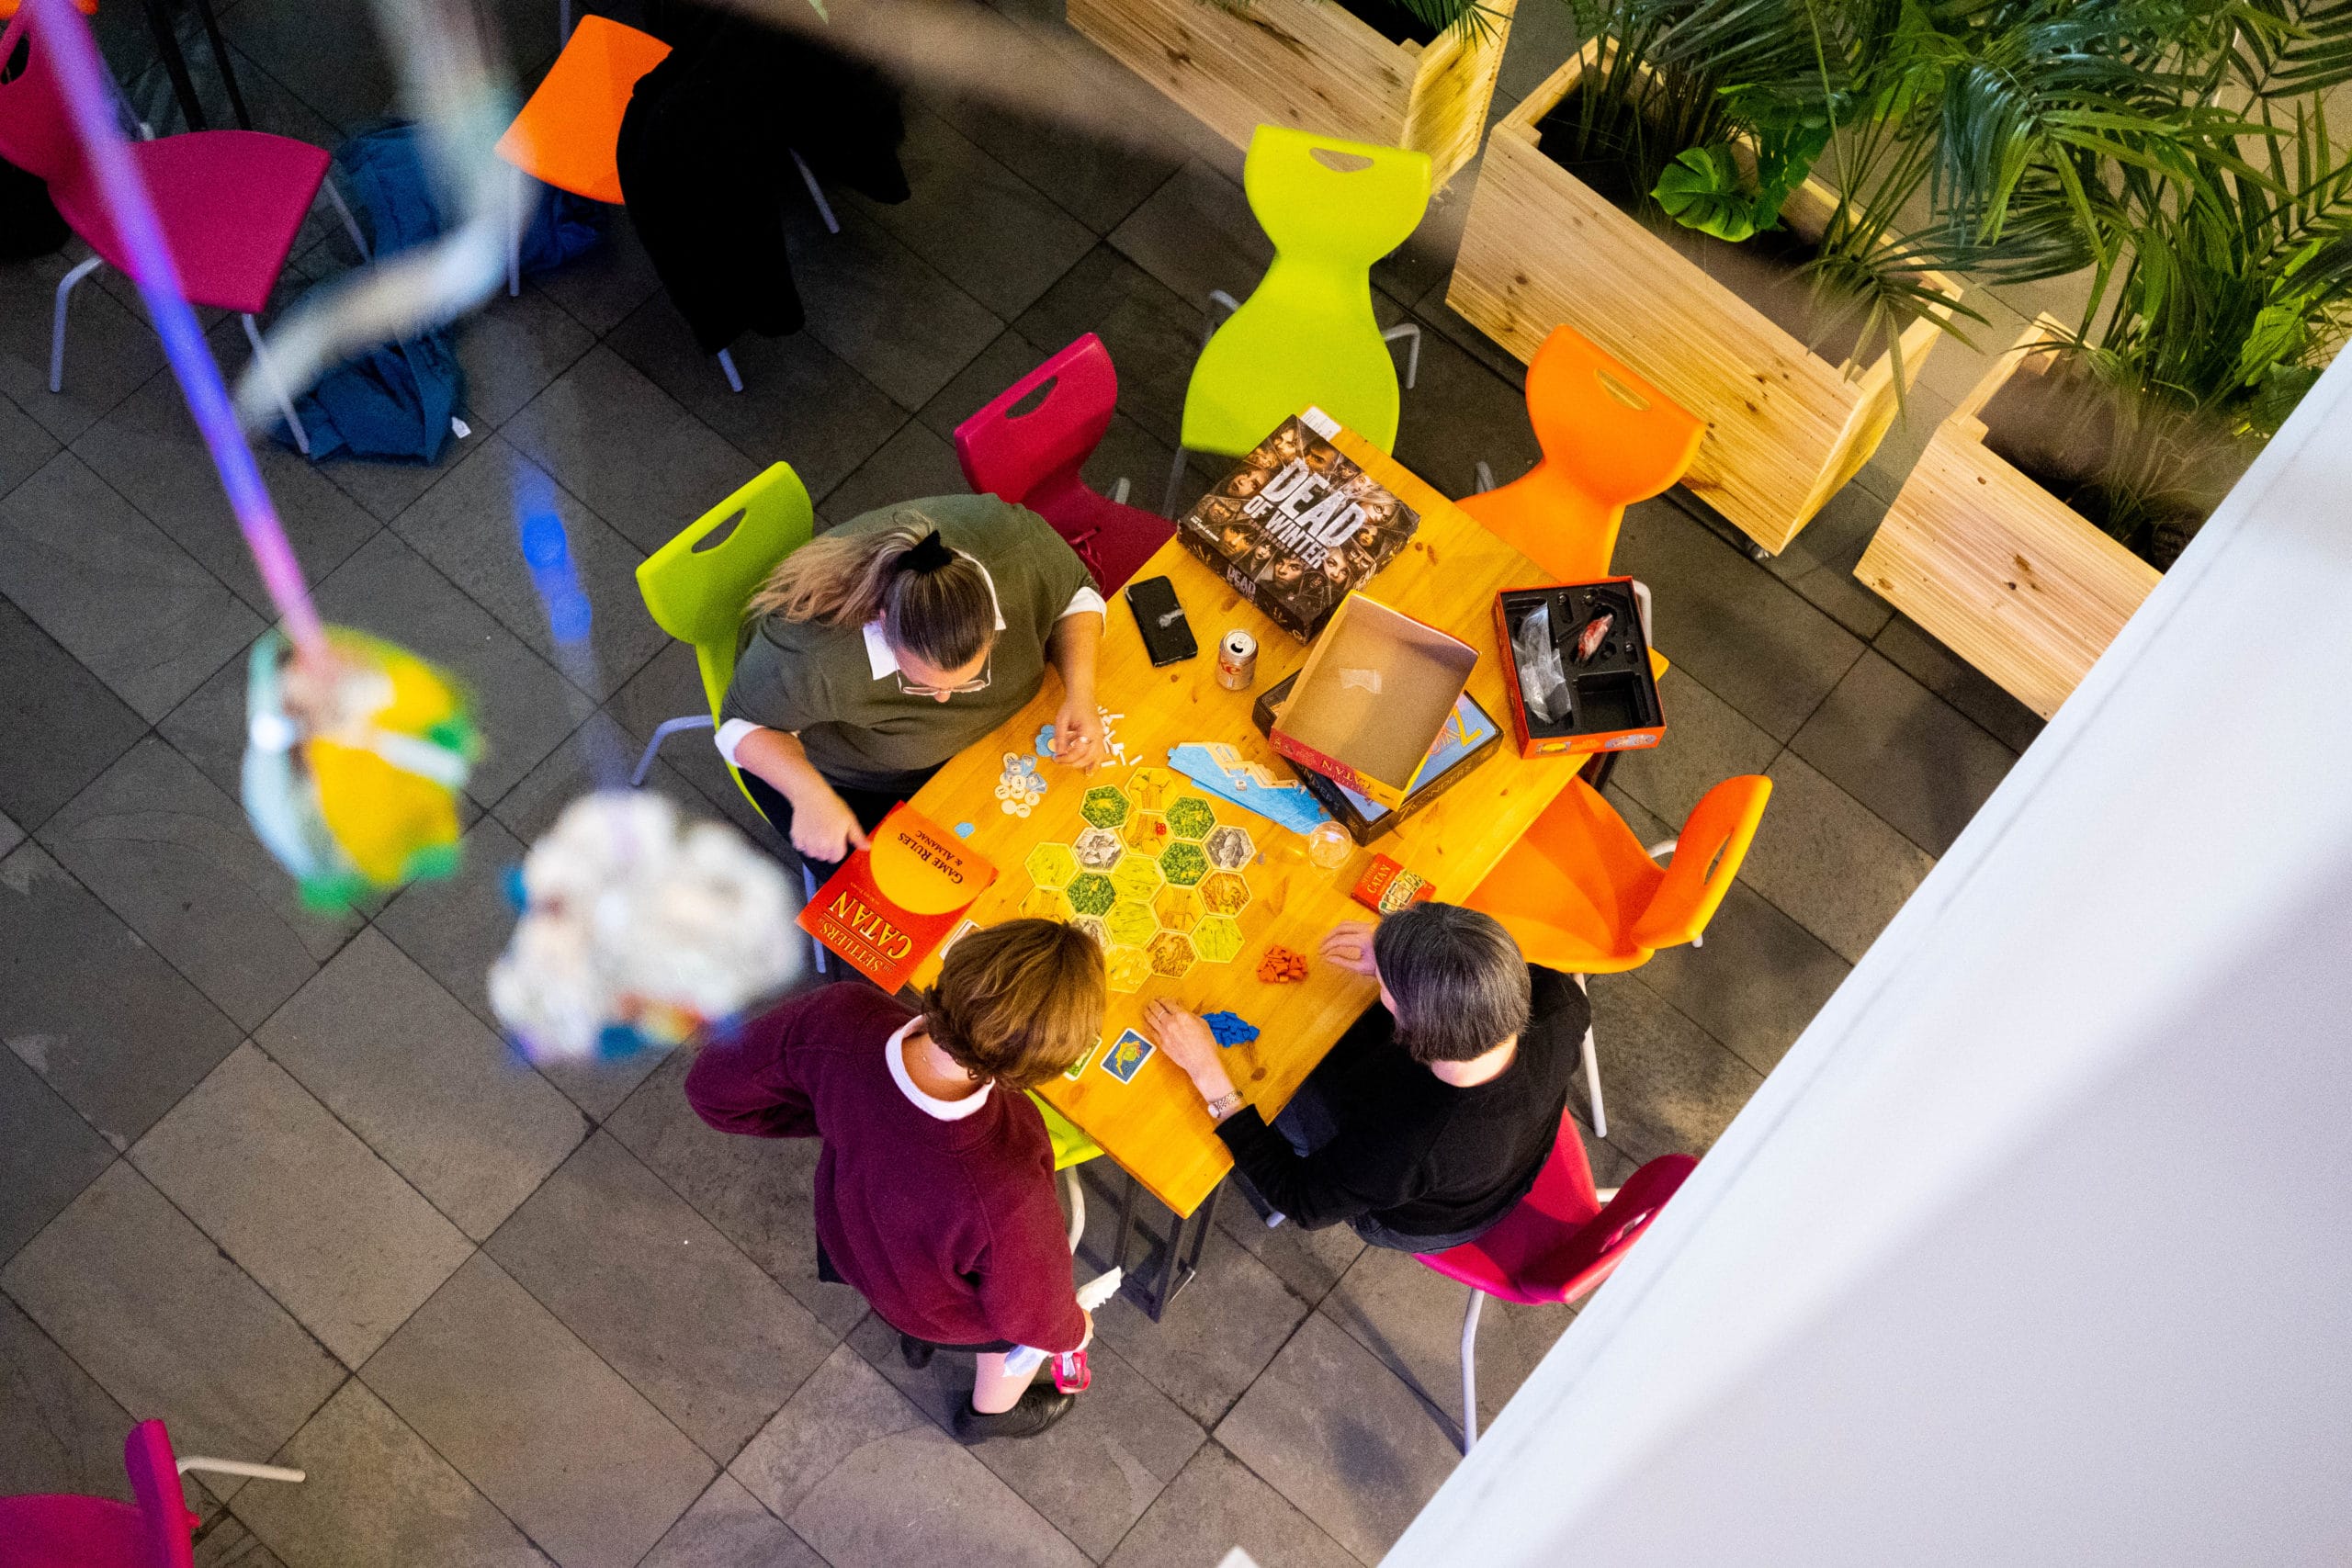 Birds eye view of the artsdepot cafe area during an evening game night. Three young people are playing a colourful board game whilst chatting.